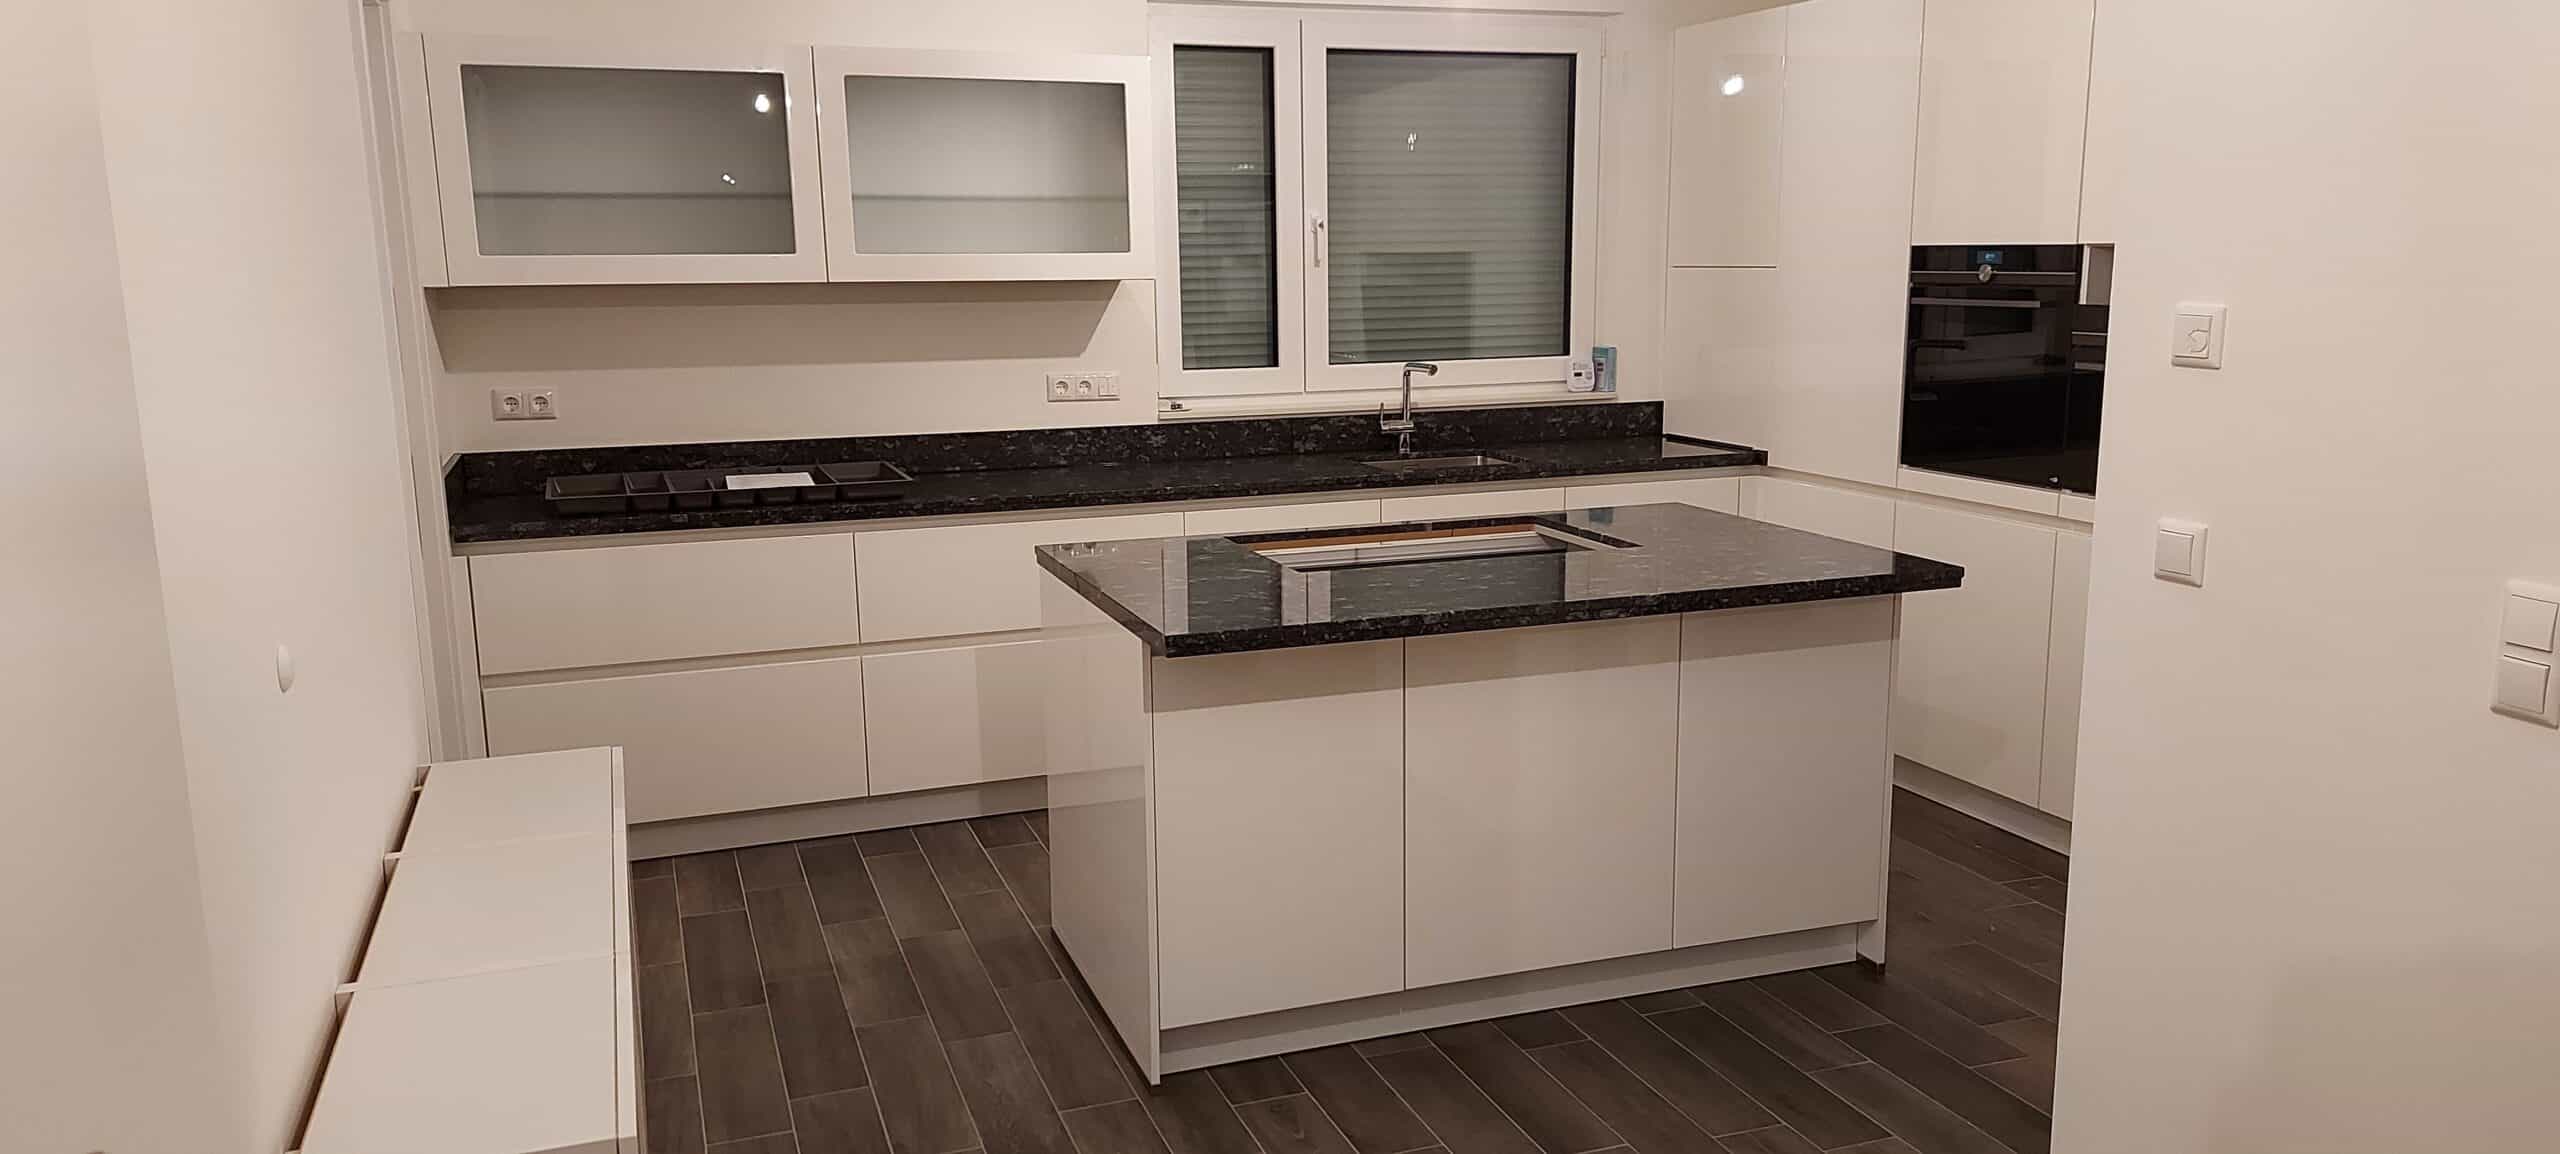 A completed German kitchen after installation